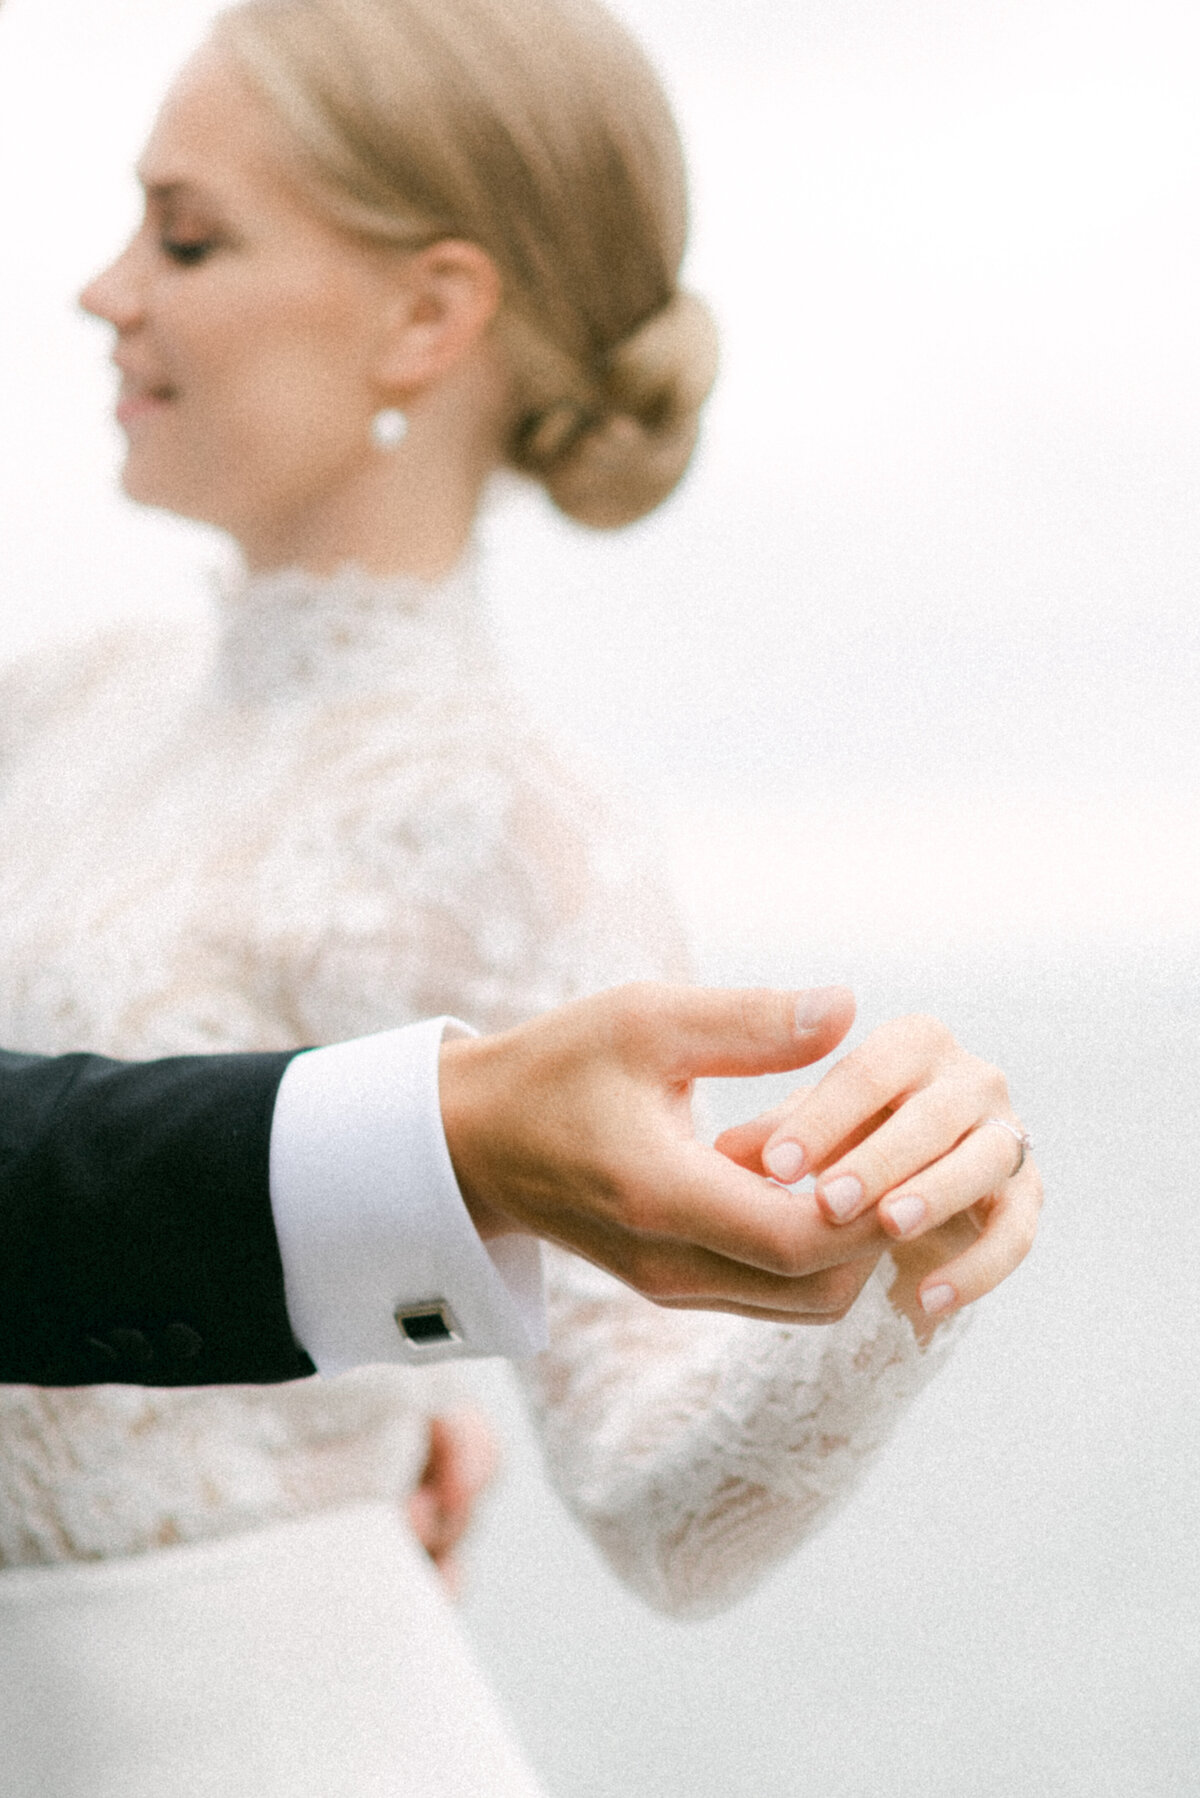 A close up image of wedding couple's hands by wedding photographer Hannika Gabrielsson